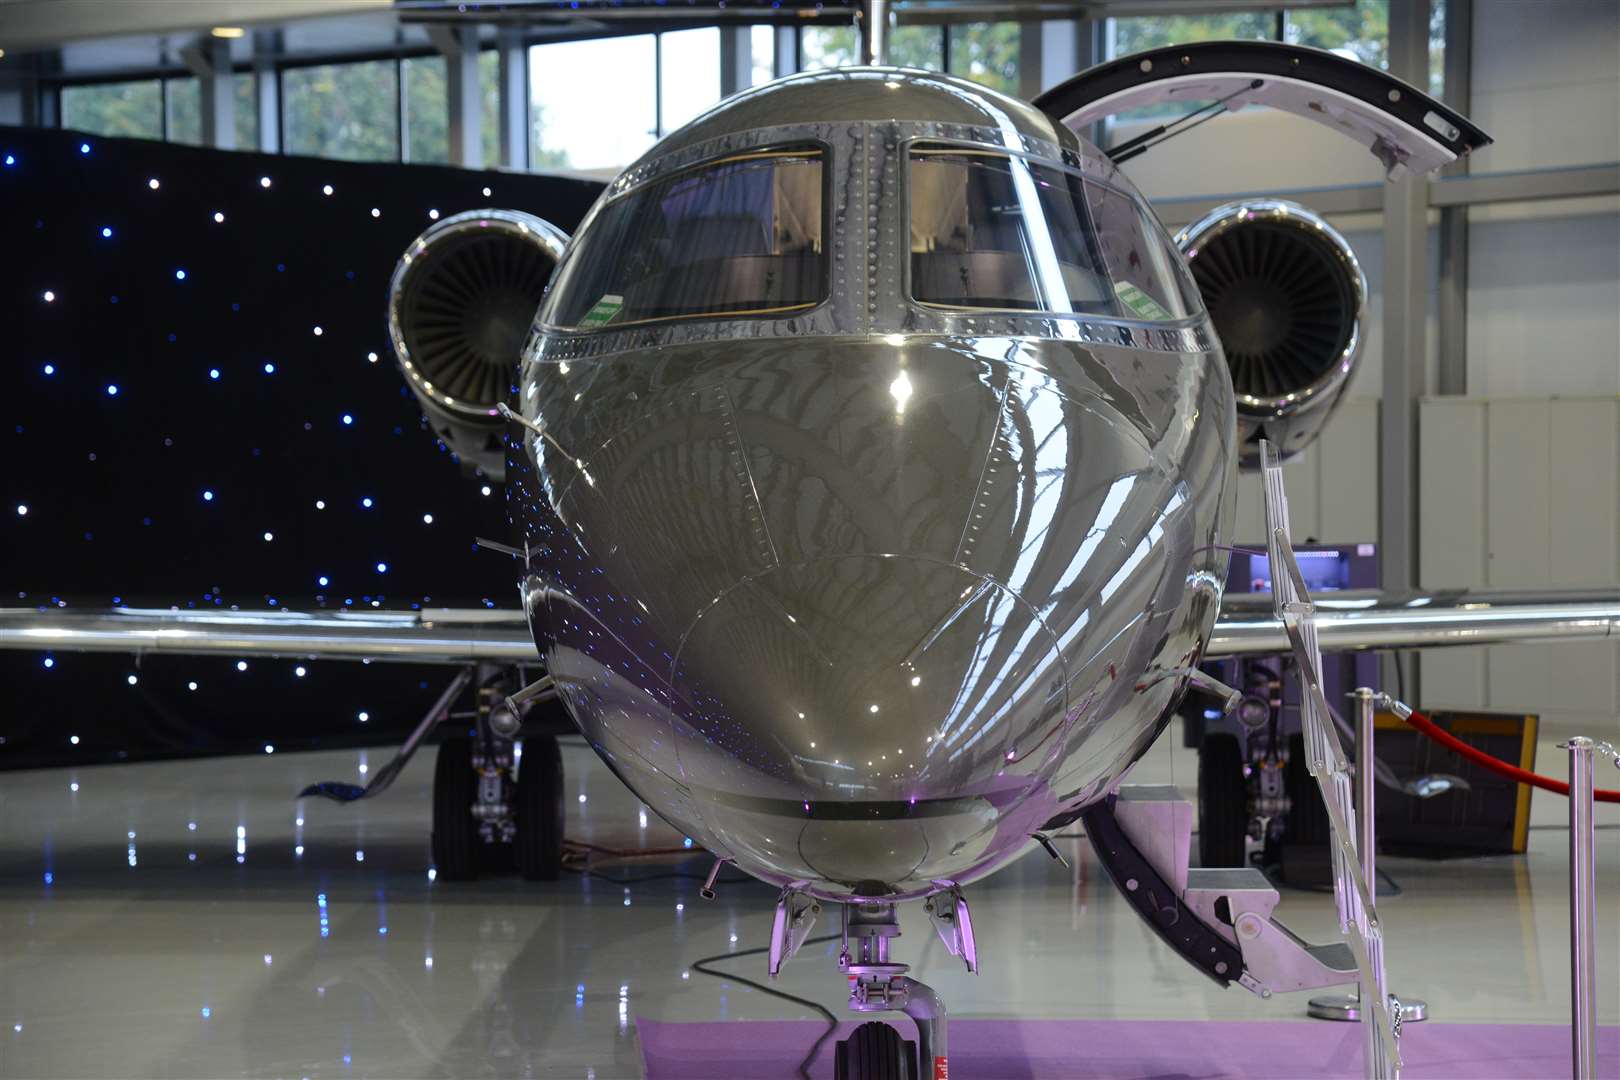 The new Learjet 75 unveiled at Biggin Hill Airport